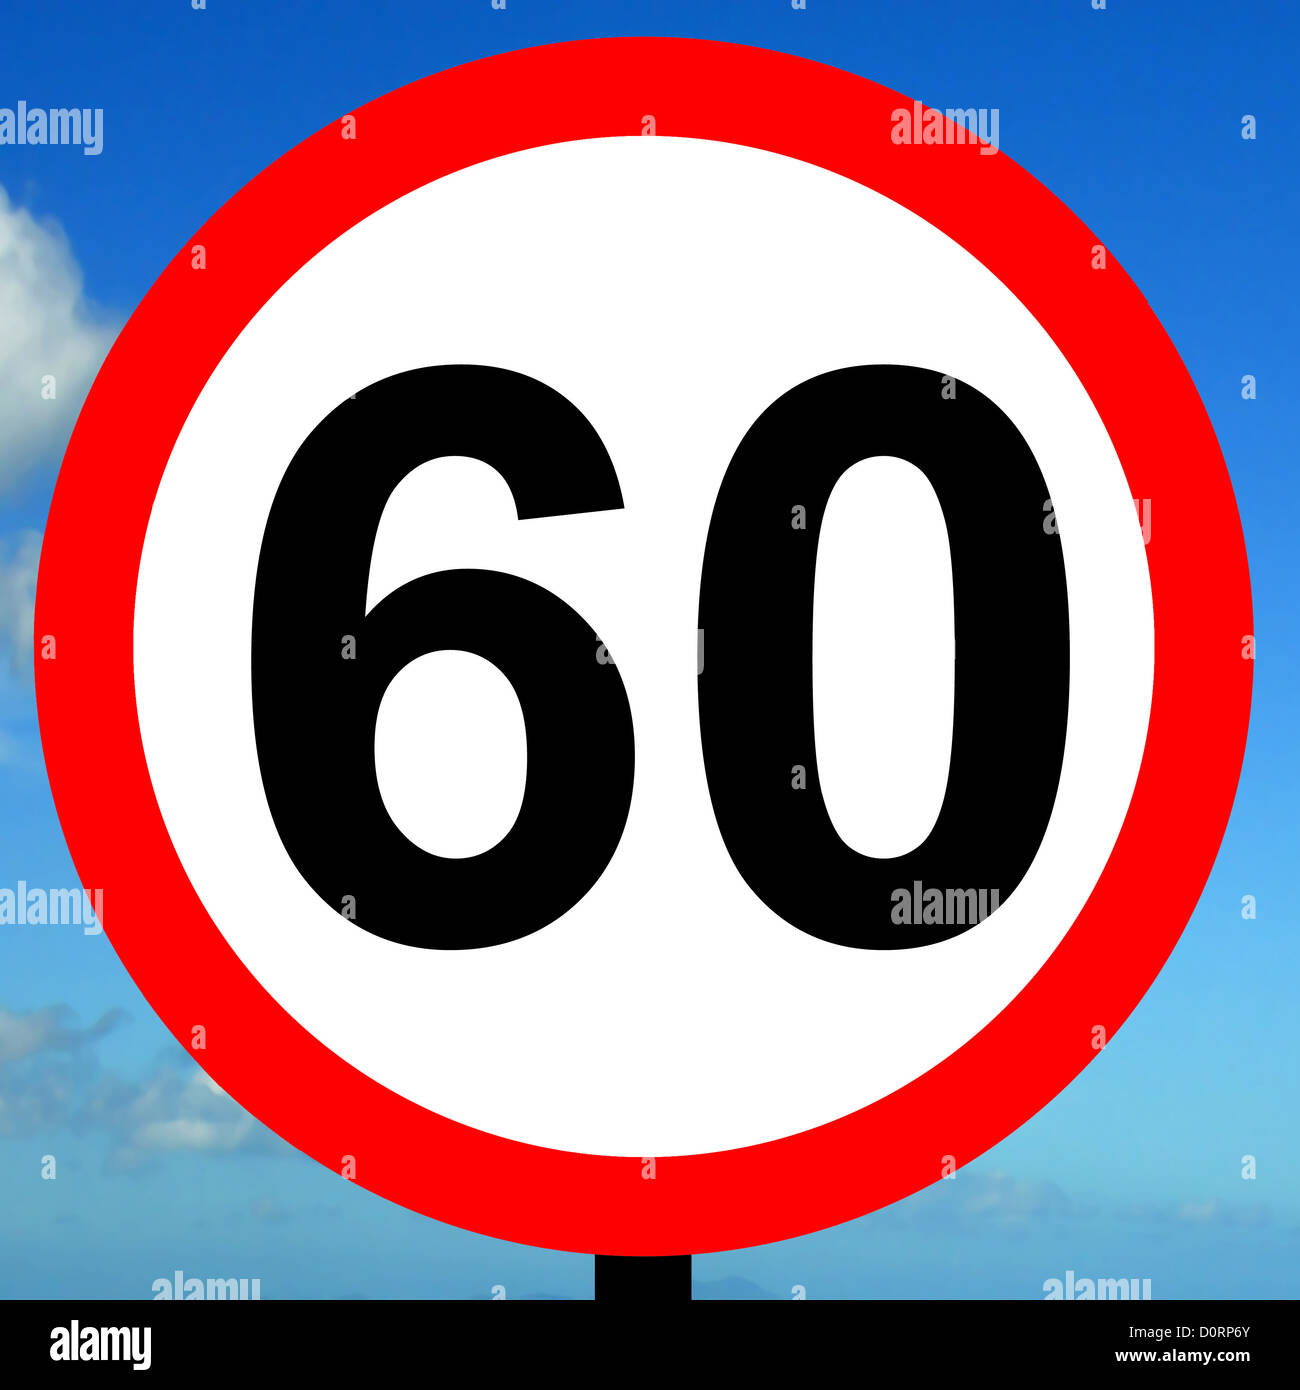 60 mph speed limit sign Stock Photo